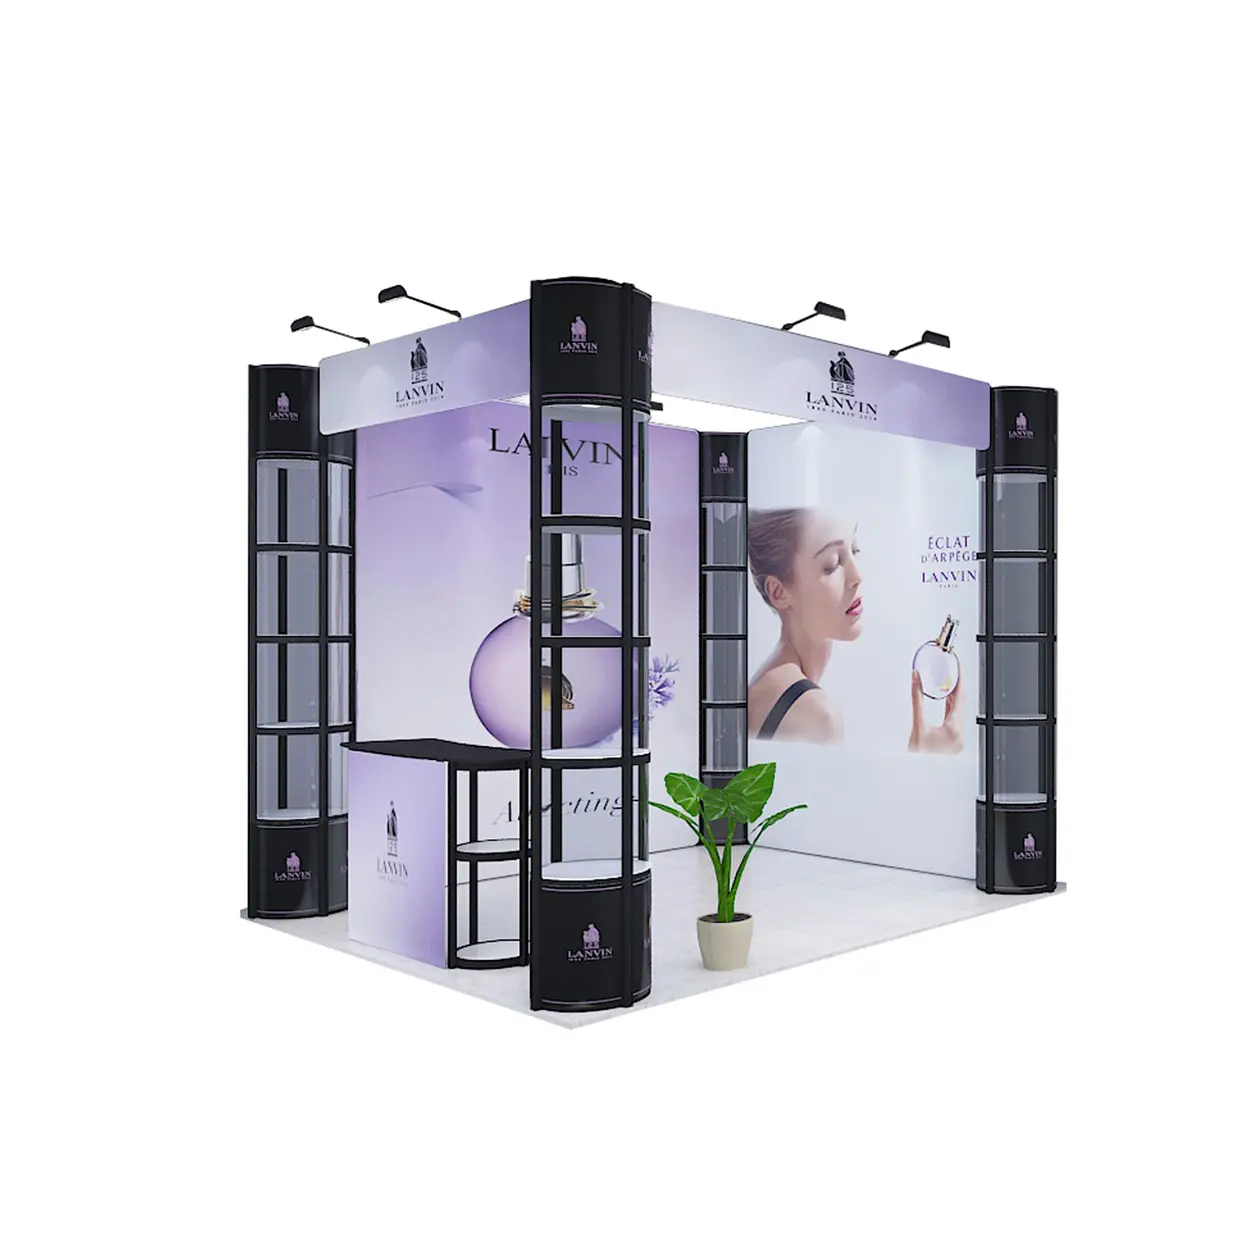 Portable exhibition display stand 6x6 tradeshow booth for sale